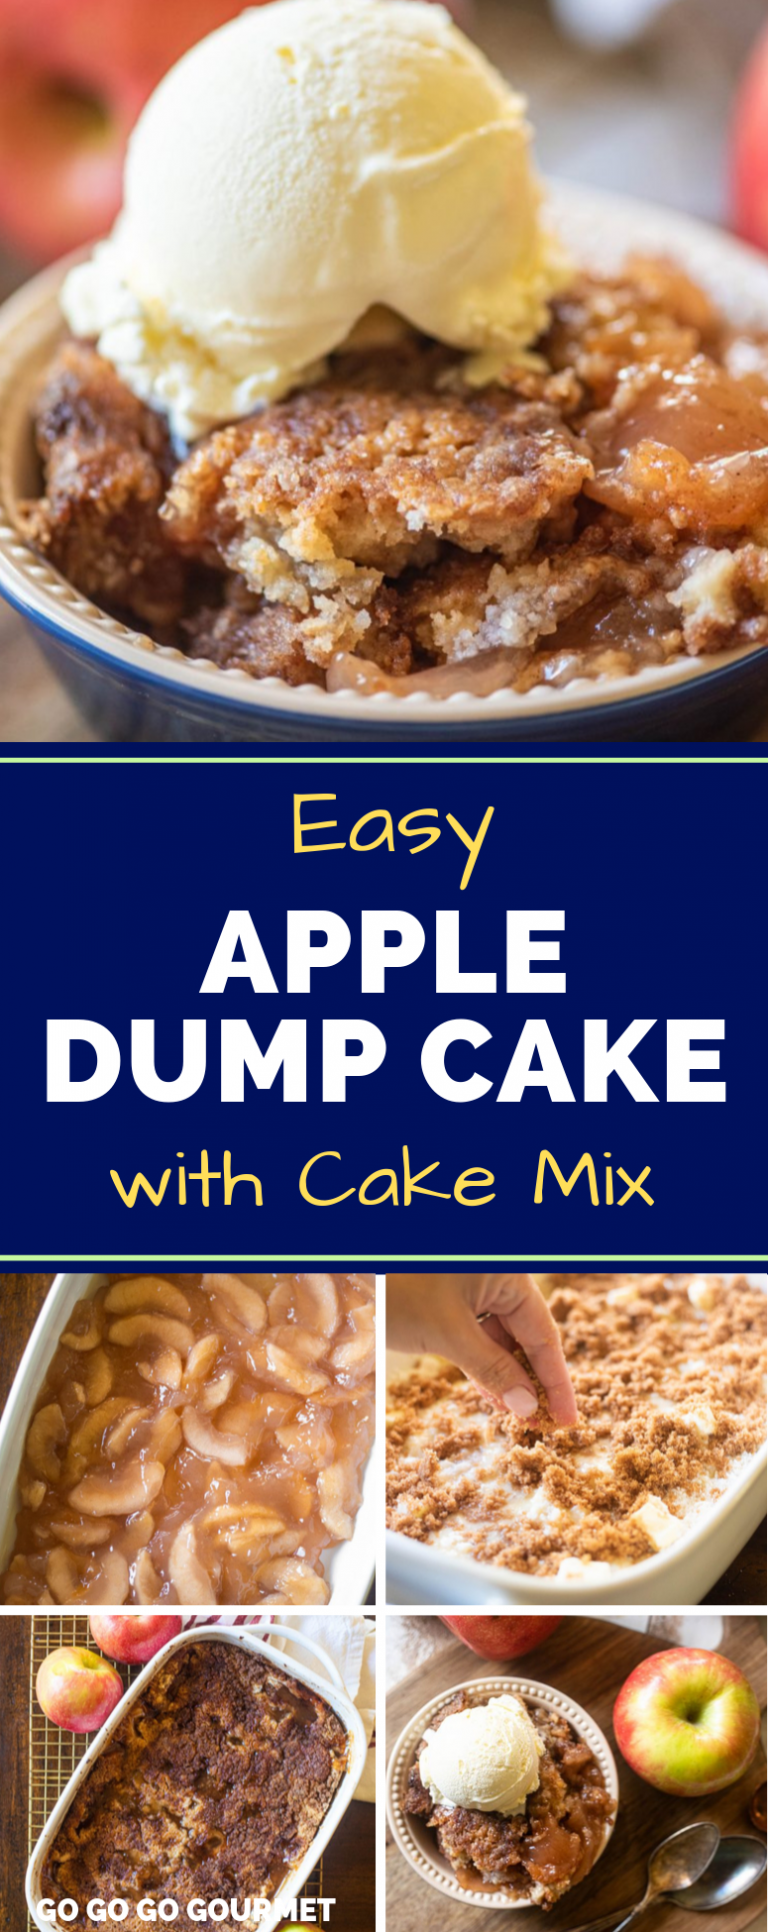 Apple Dump Cake Recipe - Apple Dump Cake Recipe with Canned Apples -   19 desserts Simple easy ideas